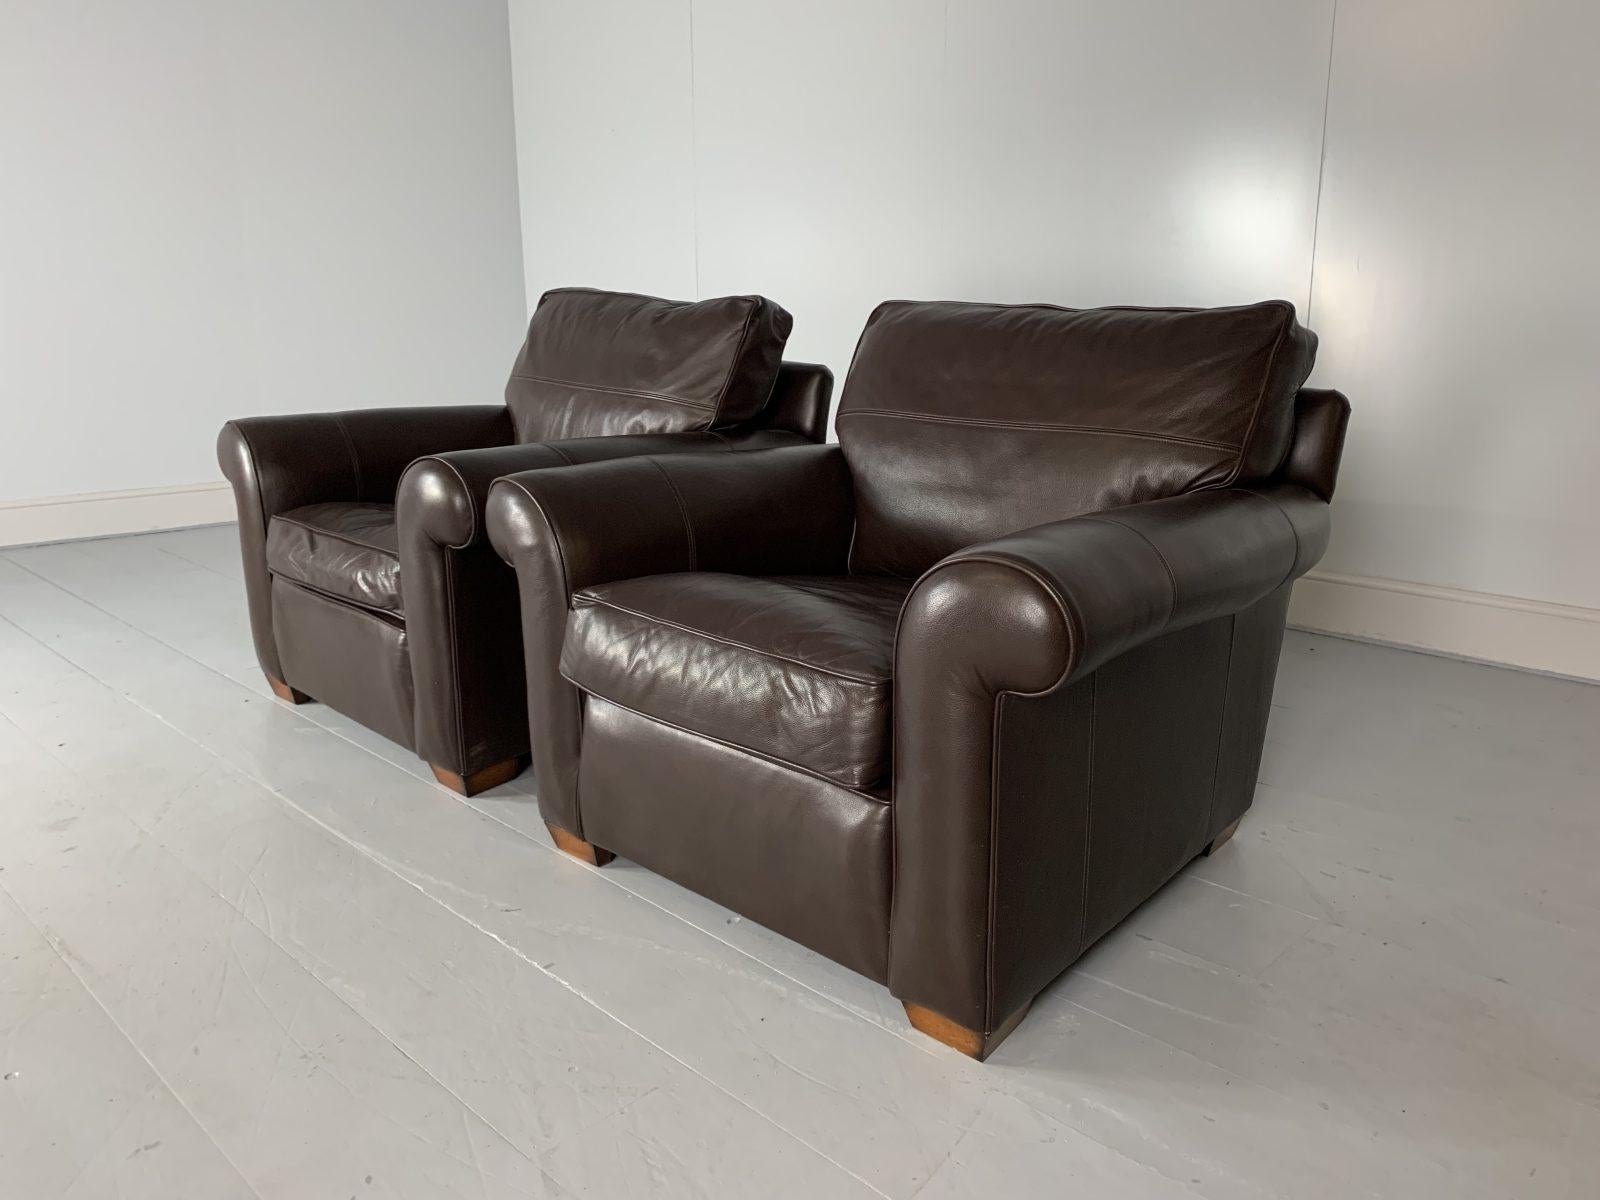 Duresta “Scroll-Arm” 2 Armchair Suite, in Dark Brown “Niven” Leather In Good Condition For Sale In Barrowford, GB